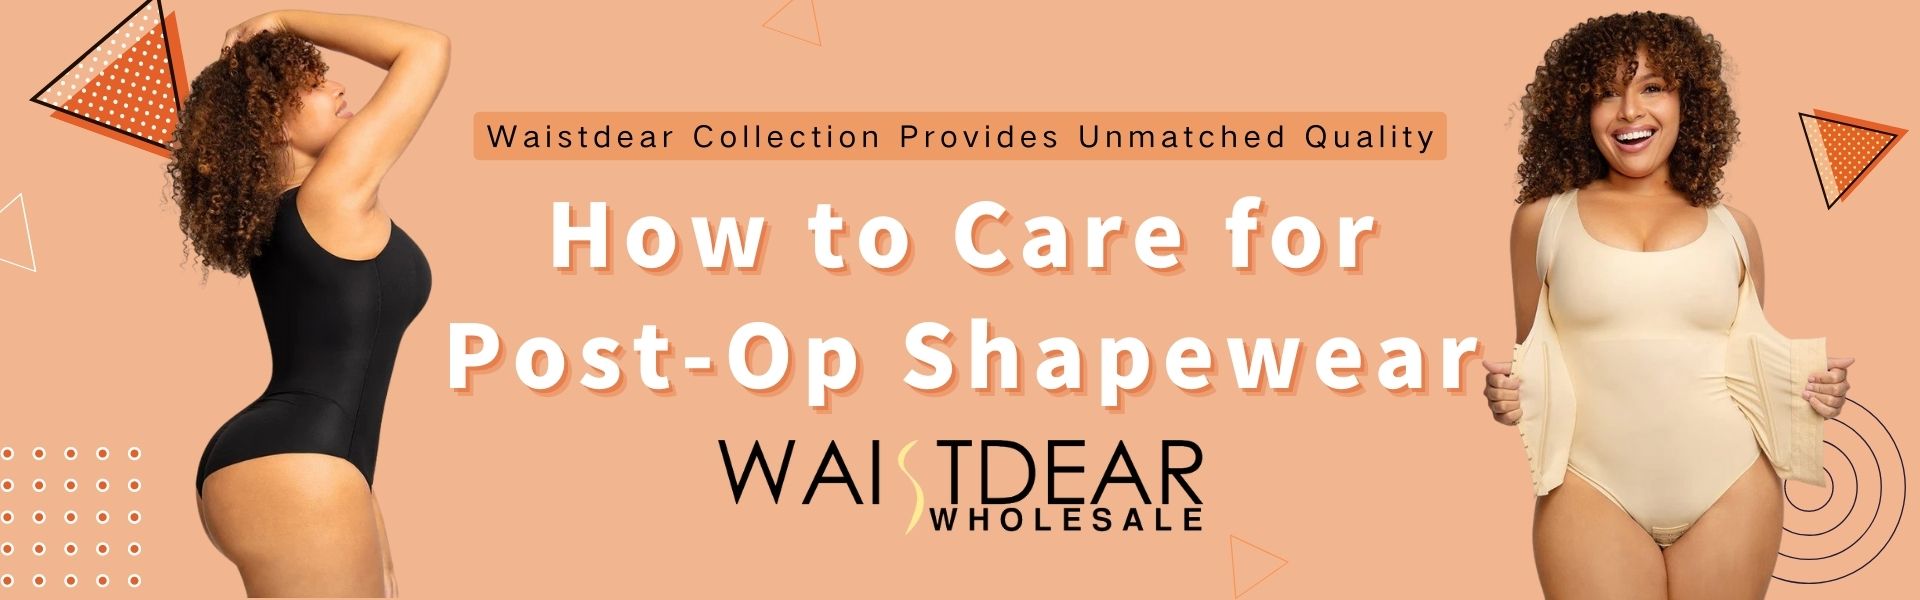 How to Care for Post-Op Shapewear?